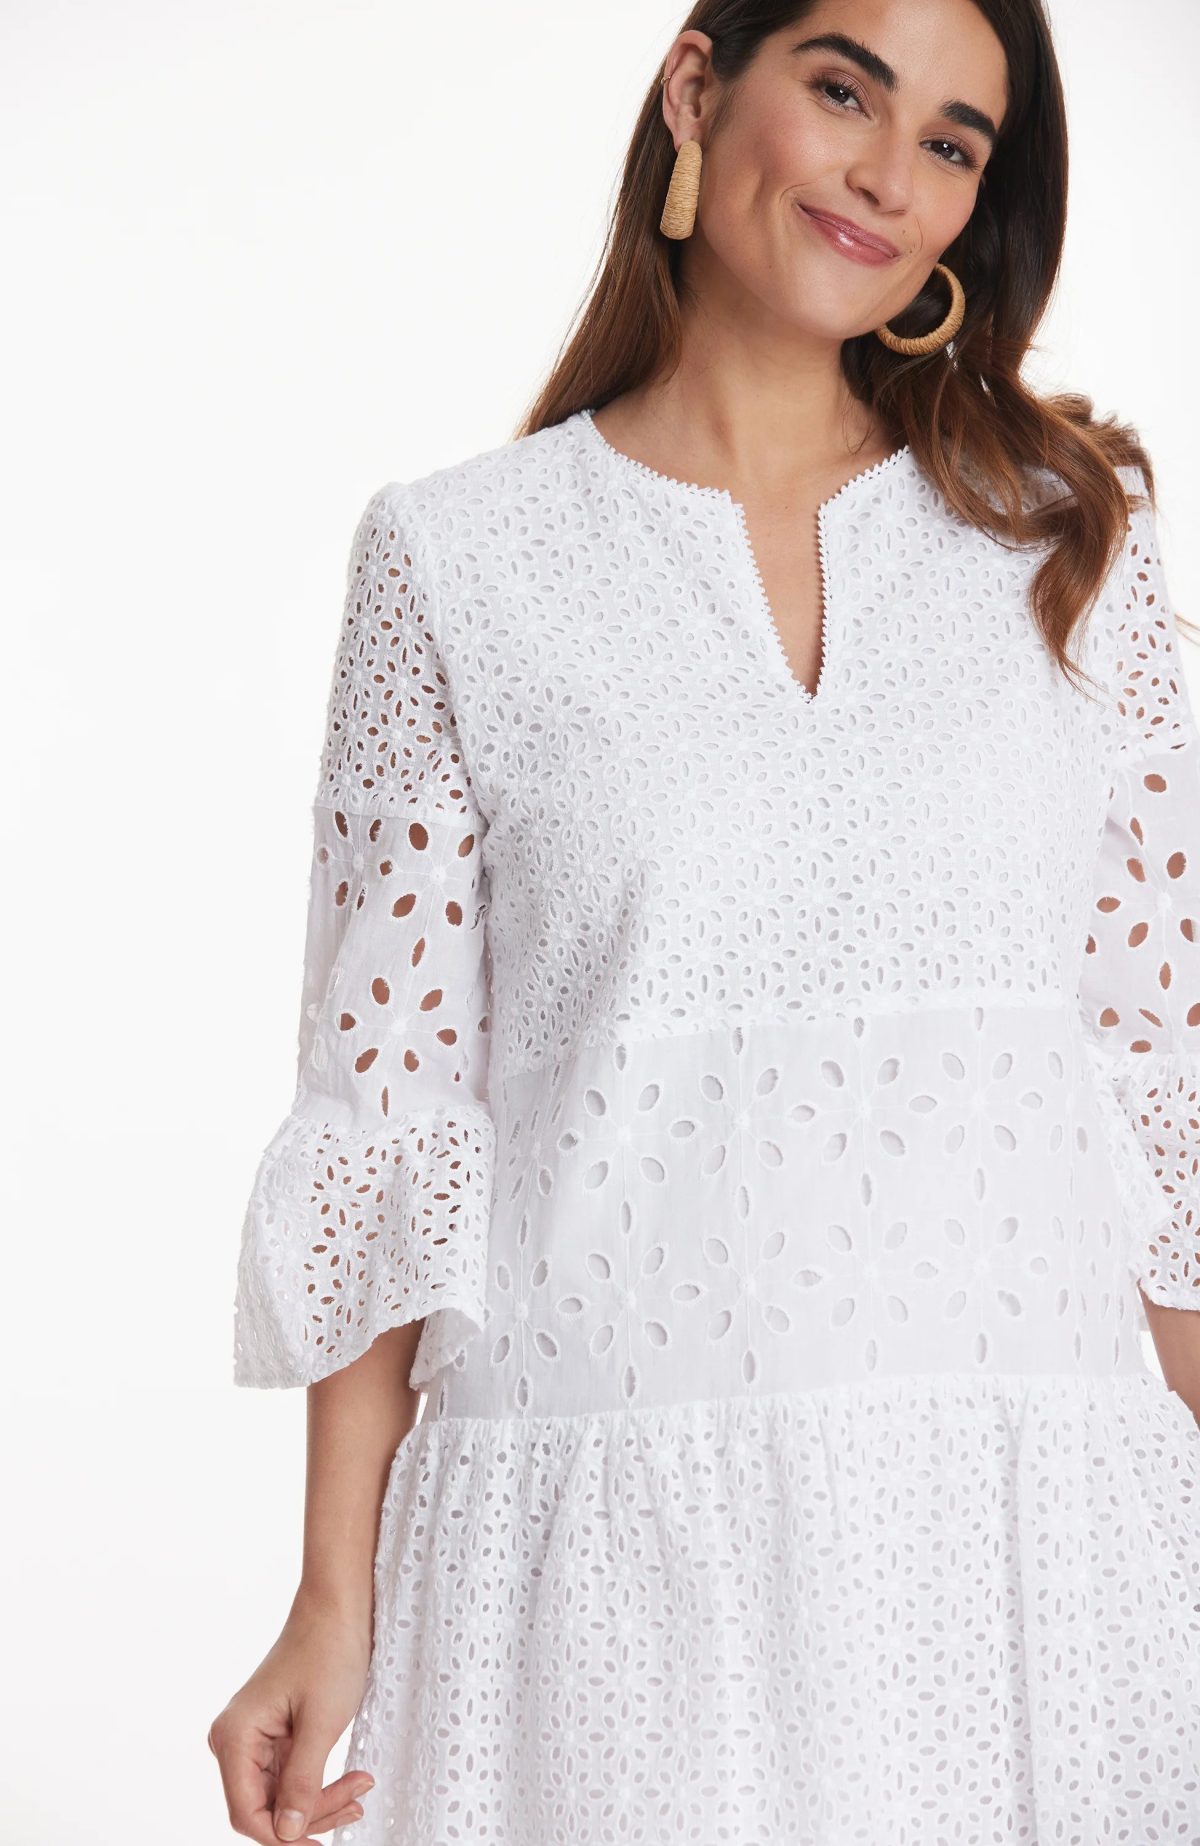 Tyler Boe 32201 White Isla Eyelet Tunic/Dress | Ooh Ooh Shoes women's clothing and shoe boutique located in Naples and Mashpee